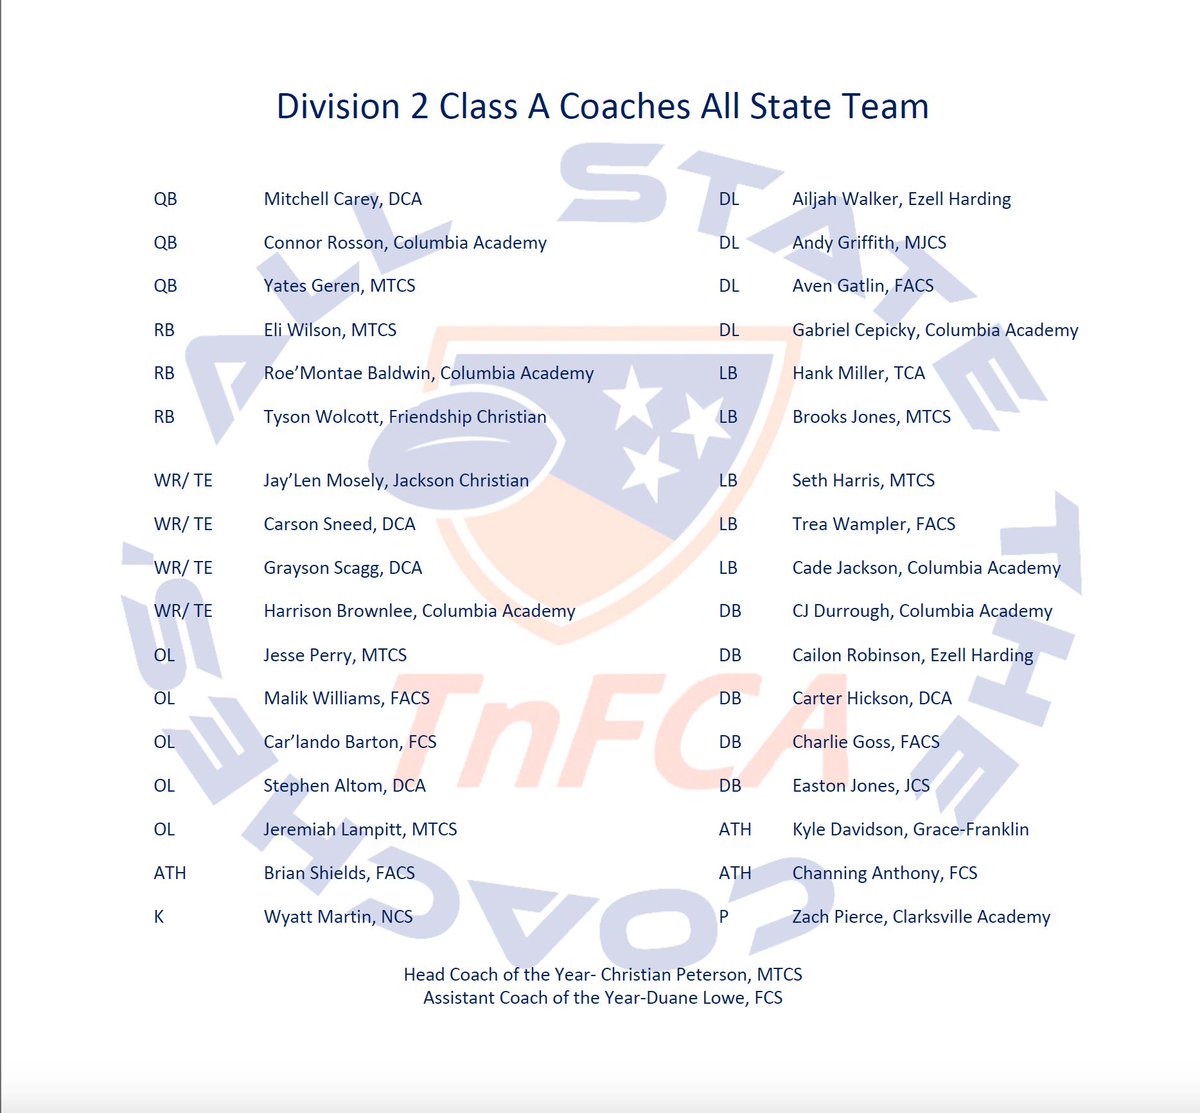 Congratulations to the Division 2 Class A All State Team that was nominated and selected by The Coaches